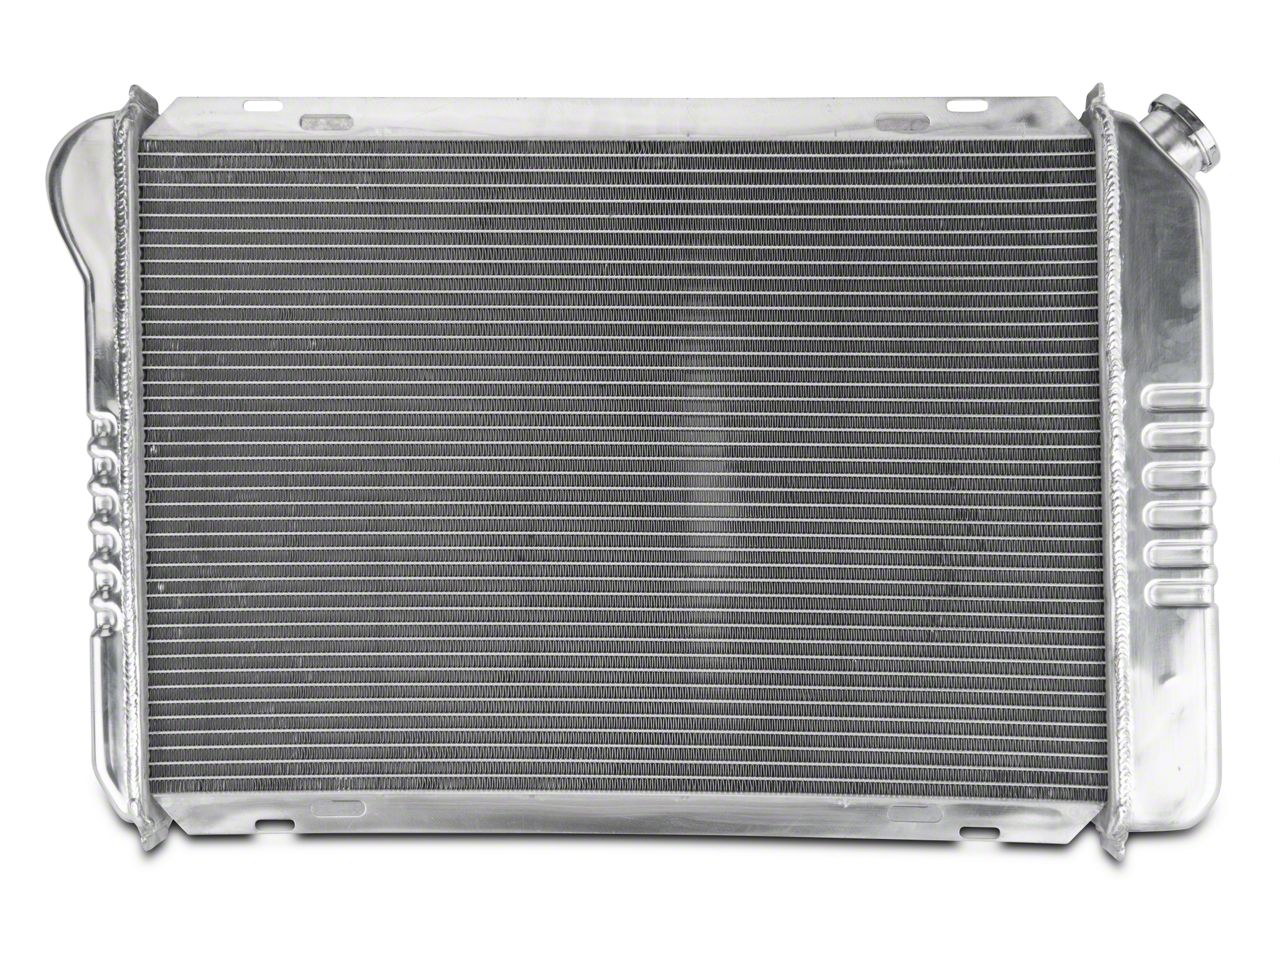 COLD-CASE Radiators Mustang Aluminum Performance Radiator; 1.25-Inch Tubes  LMM570A (87-93 5.0L Mustang) - Free Shipping